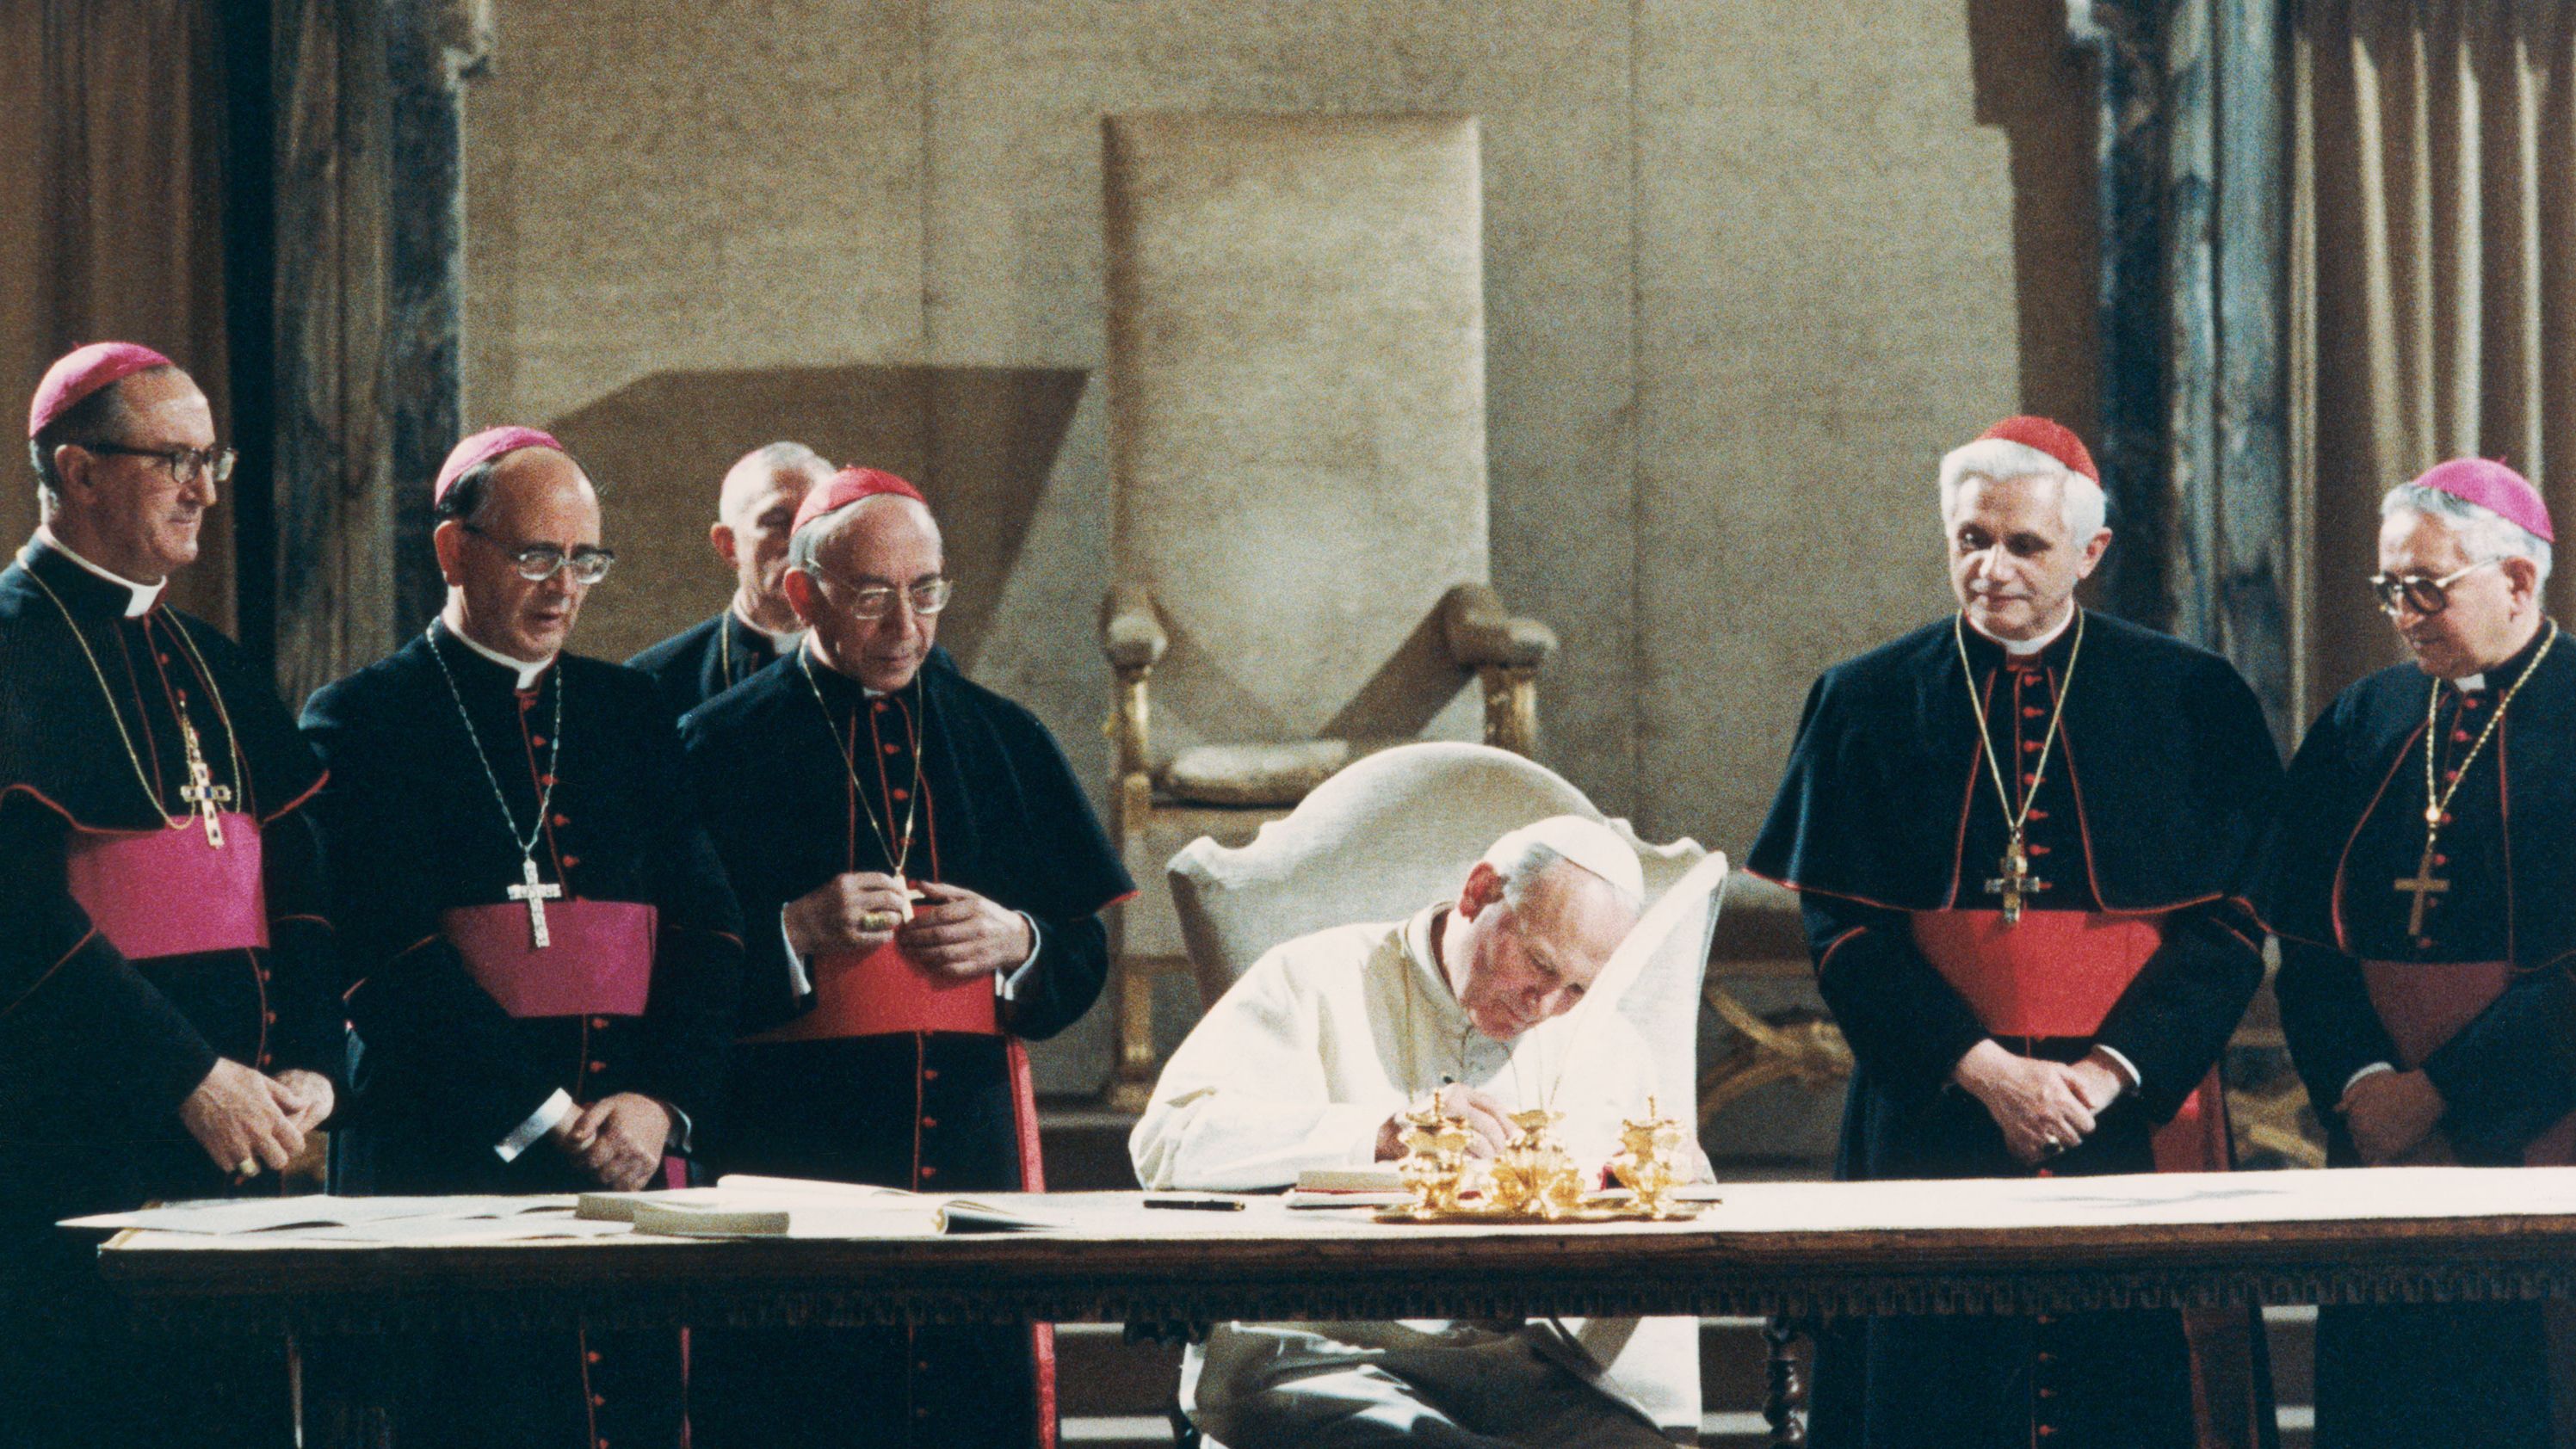 Pope John Paul II signs the new Roman Catholic Code of Canon Law in 1983. Benedict, second from right, served as the Pope's chief theological adviser.